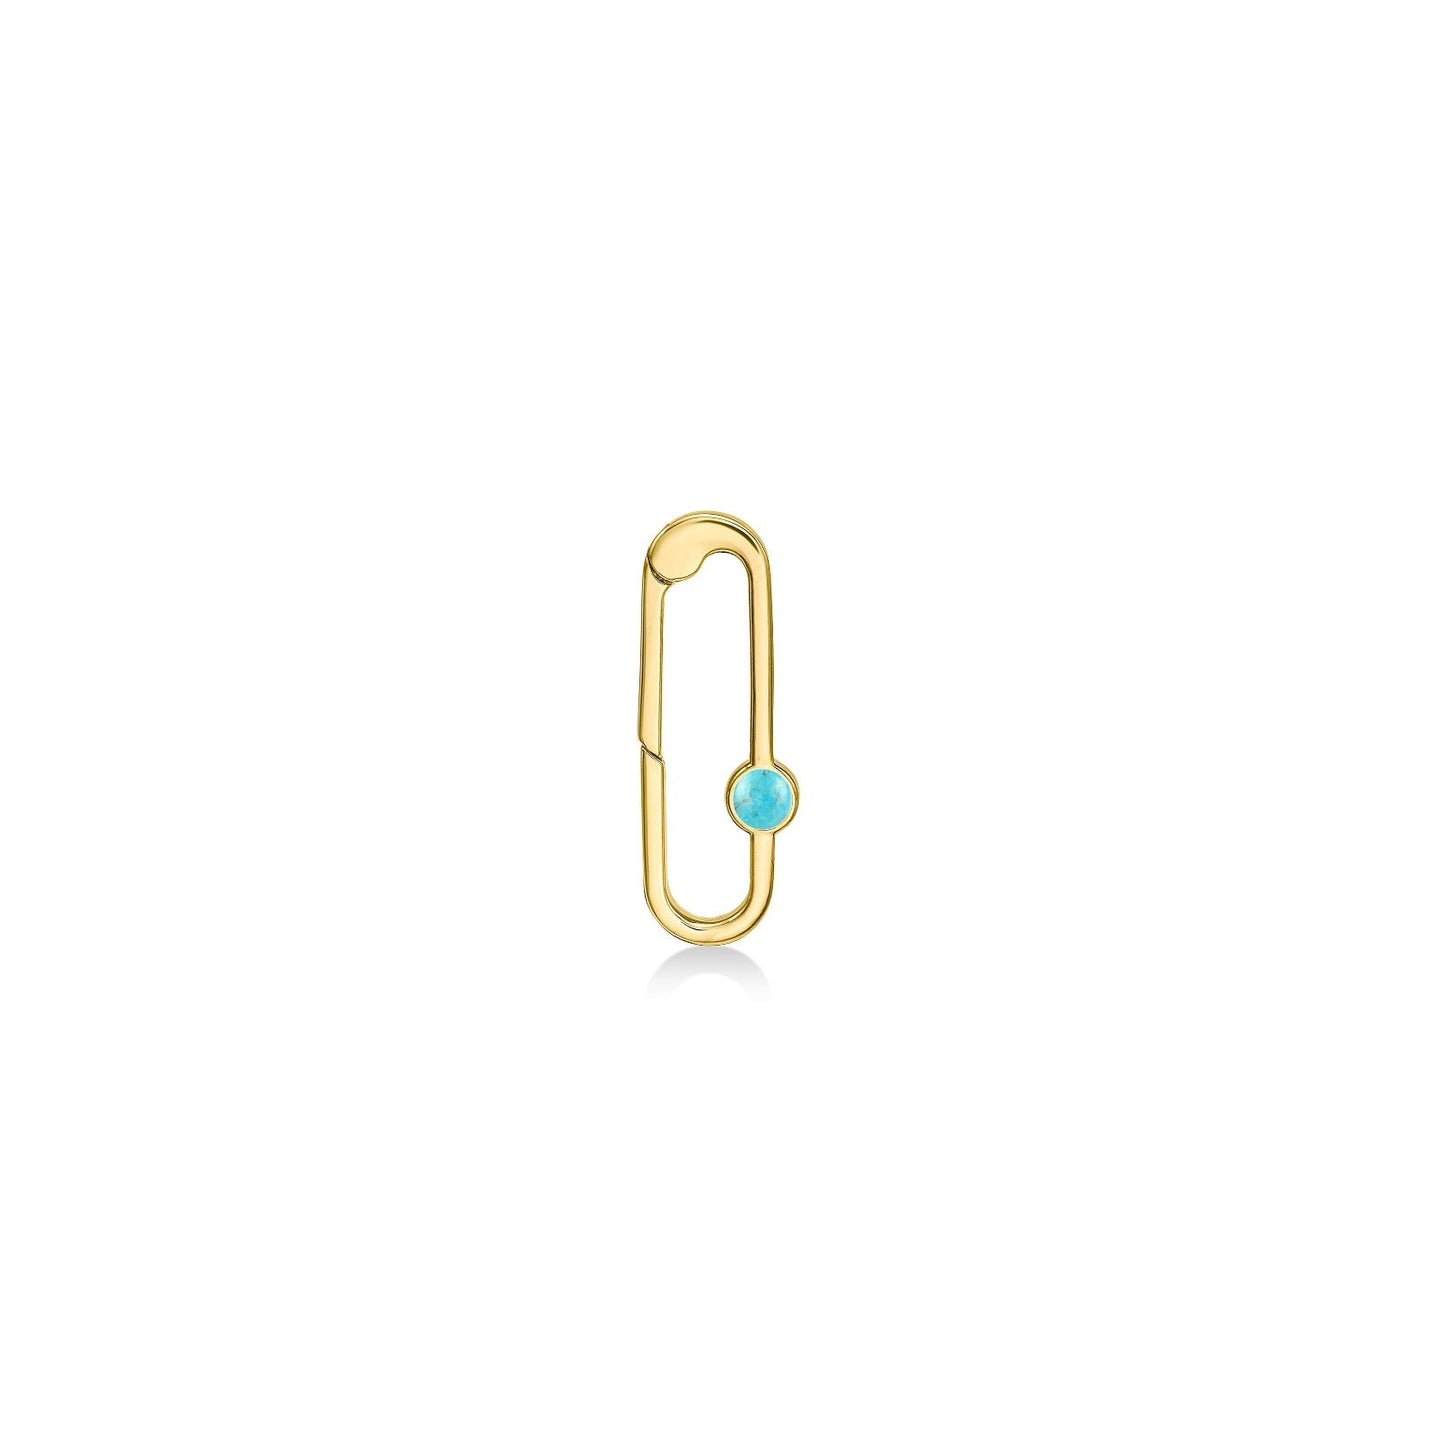 14k gold paperclip charm lock with turquoise